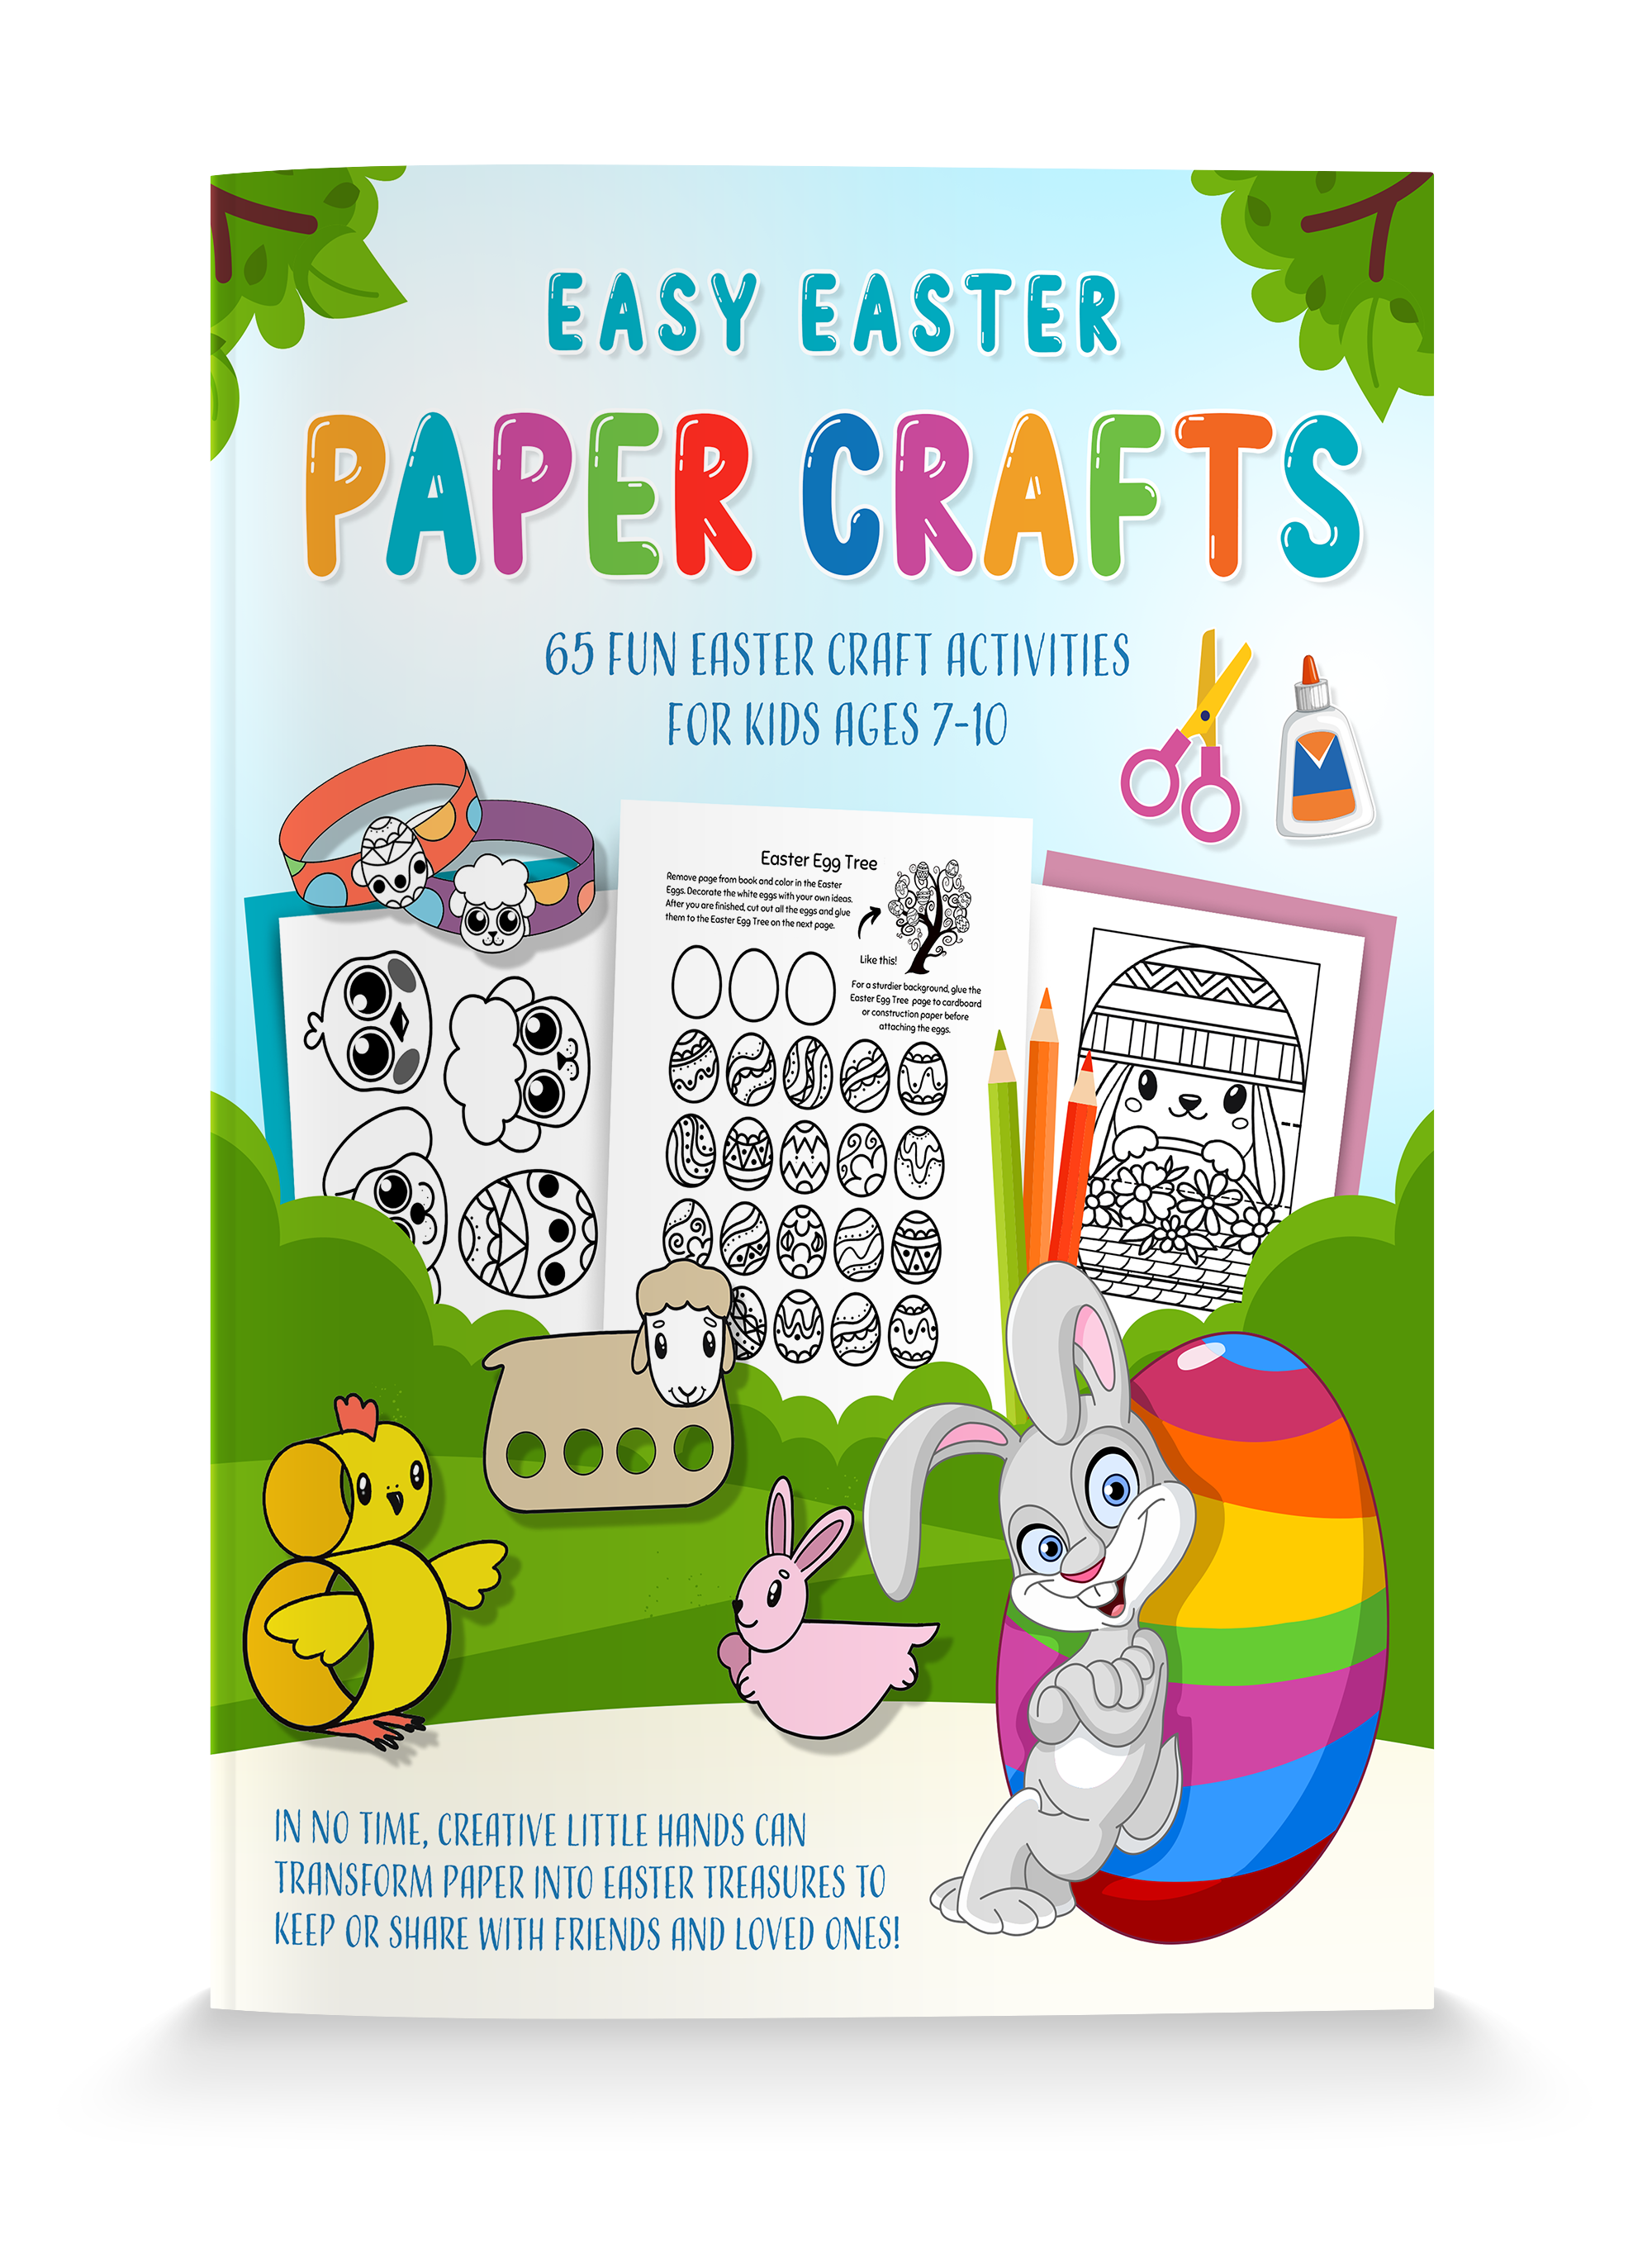 Easy Easter Paper Crafts